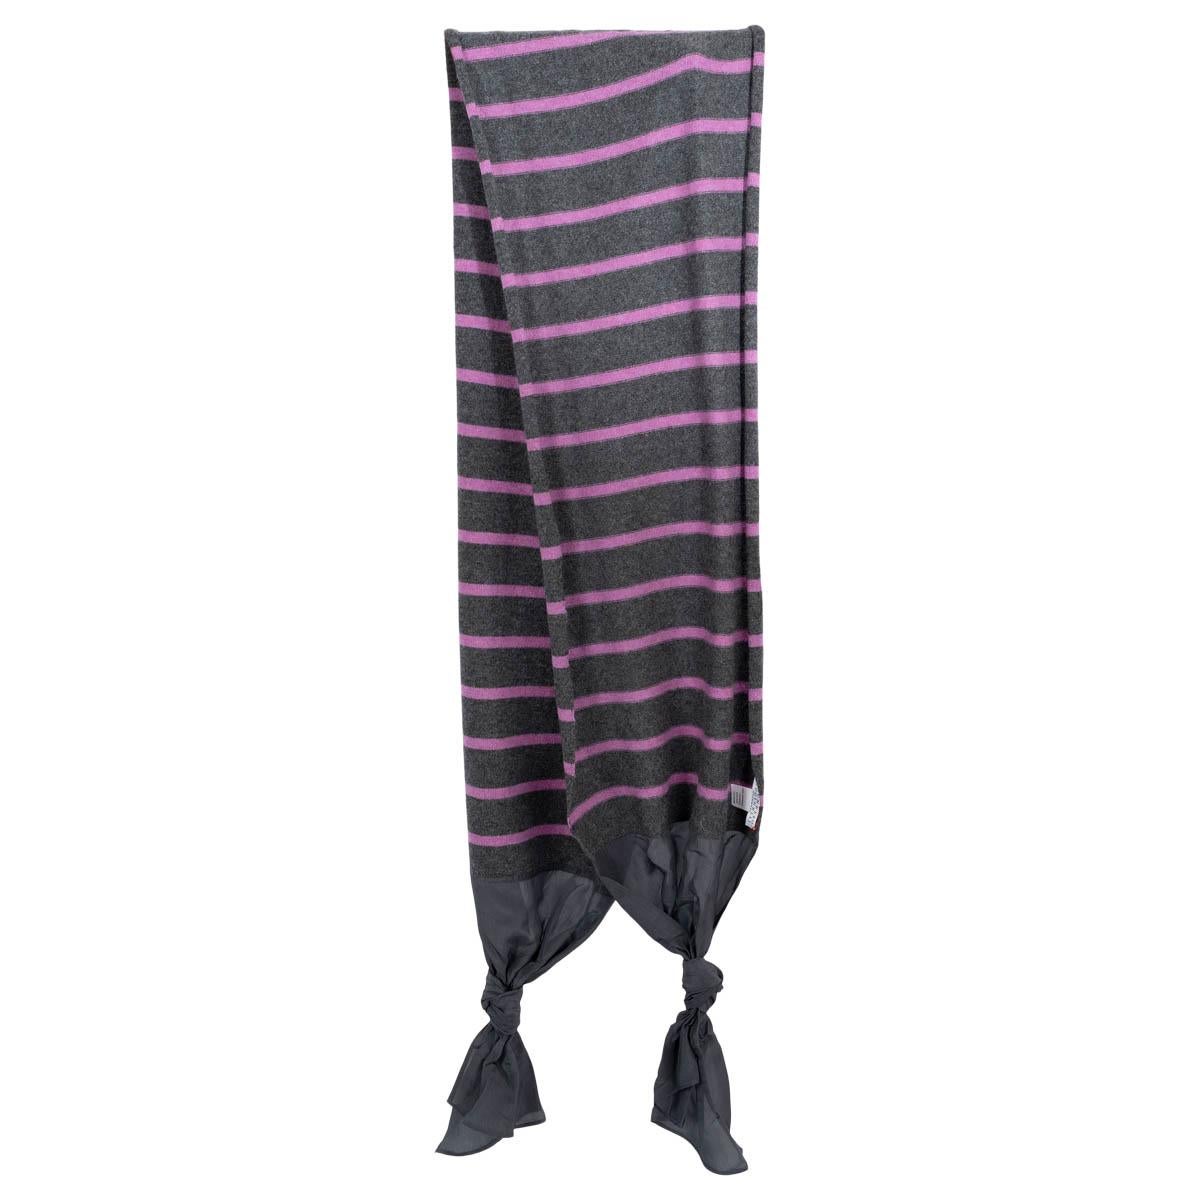 100% authentic Brunello Cucinelli striped muffler in grey and purple cashmere (100%) and details in silk (100%). Has been worn and is in excellent condition. 

Measurements
Width	32cm (12.5in)
Length	121cm (47.2in)

All our listings include only the